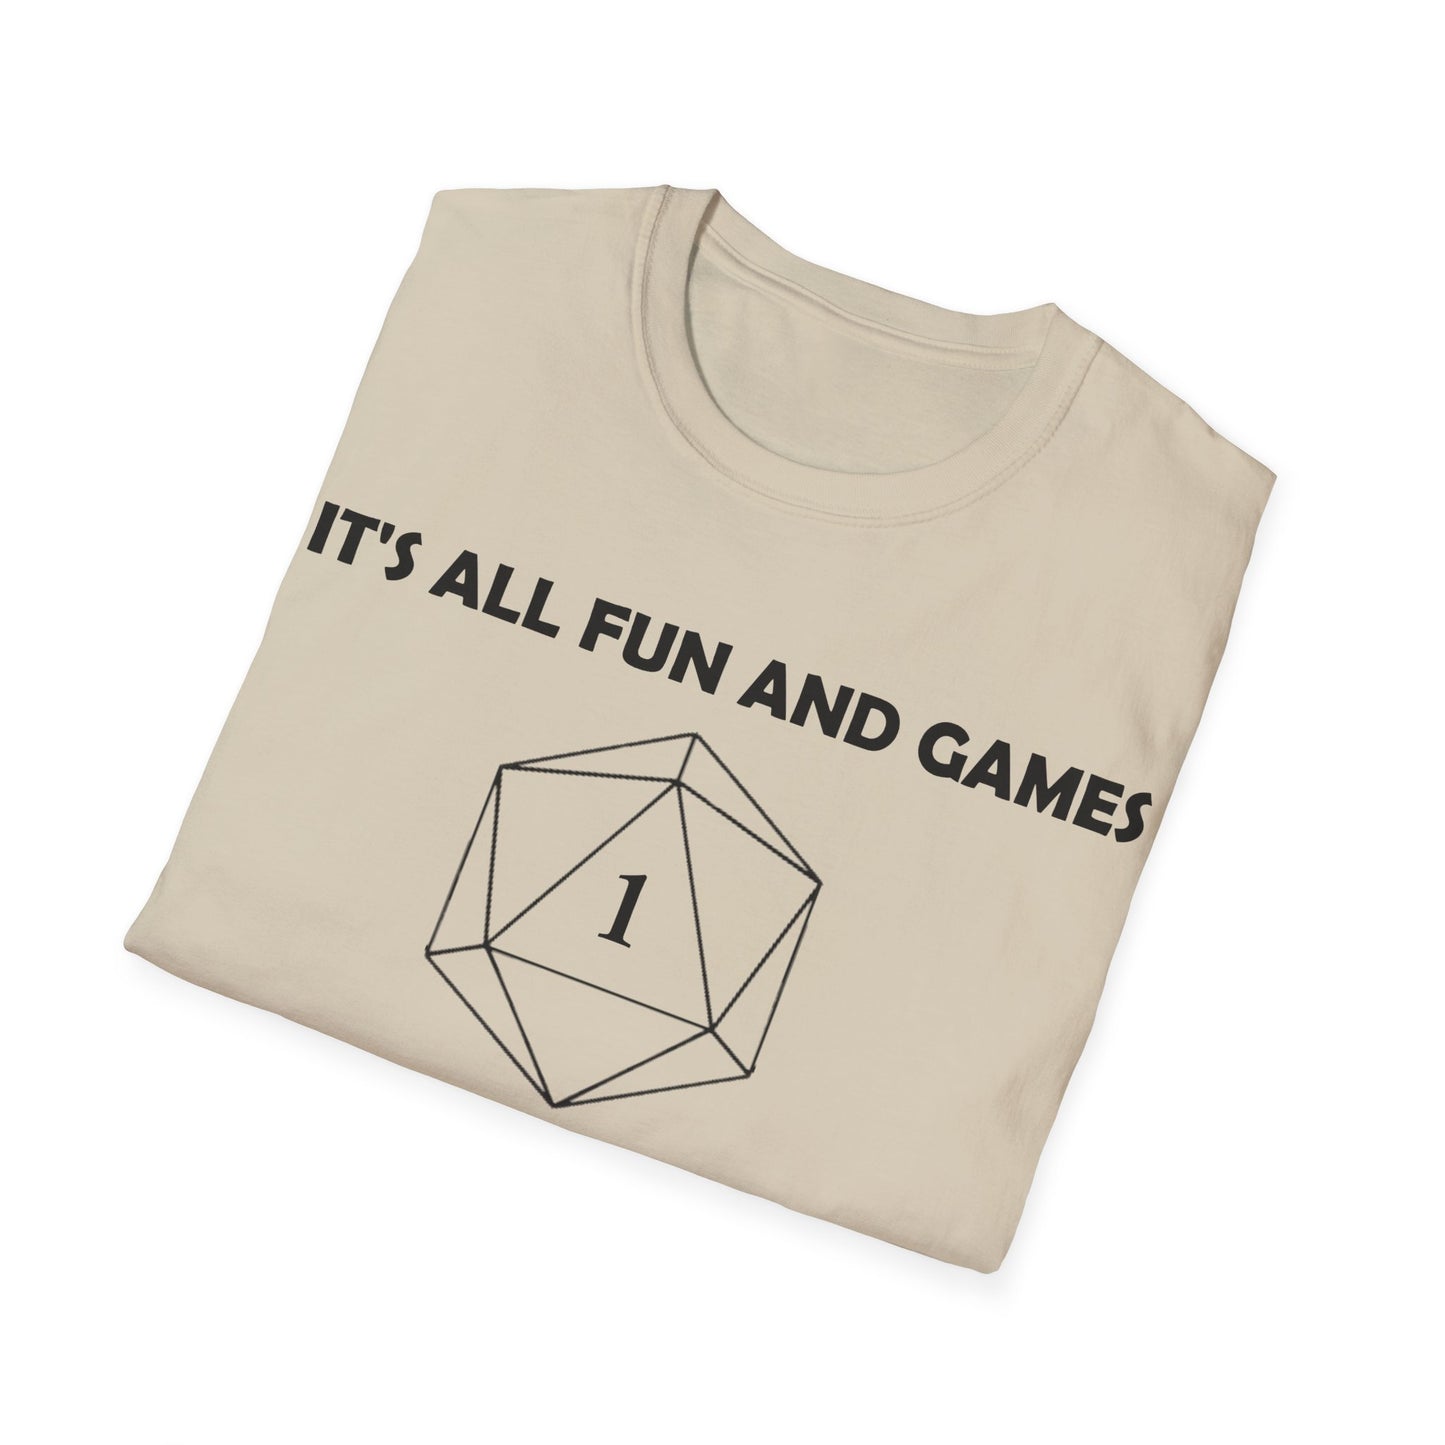 All fun and games - Black - Unisex Softstyle T-Shirt